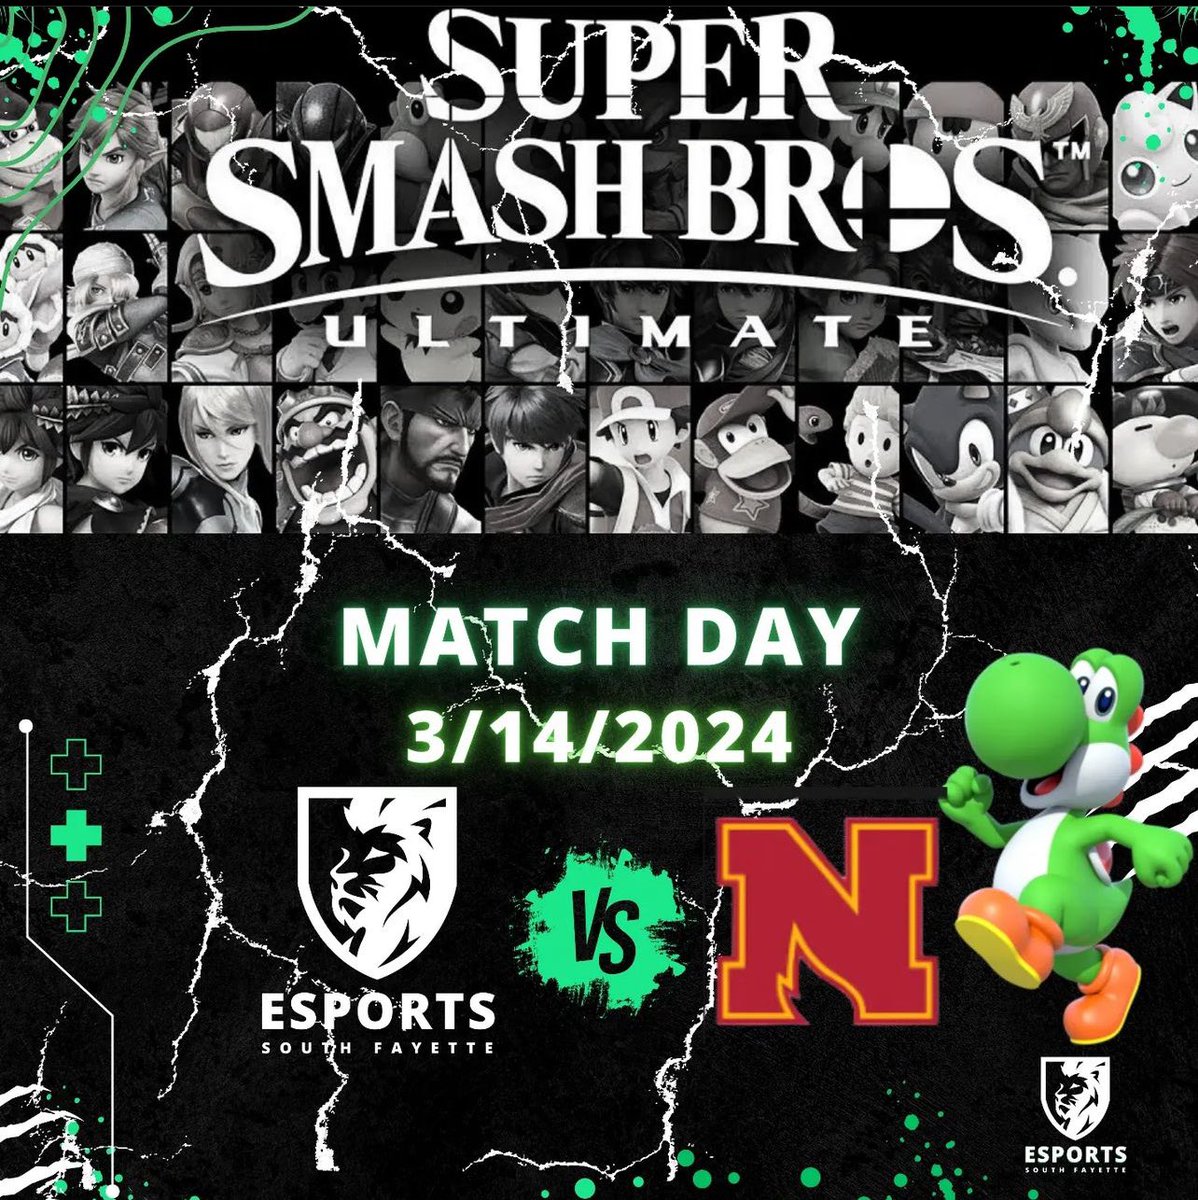 Get ready for an epic showdown as South Fayette High takes on Northgate in the ultimate Super Smash Bros. battle! Who will emerge victorious and claim the title of Smash Champions? Let the games begin! #SmashBros #HighSchoolRivalry #GameOn #SFHSLionPride #SFLionPride